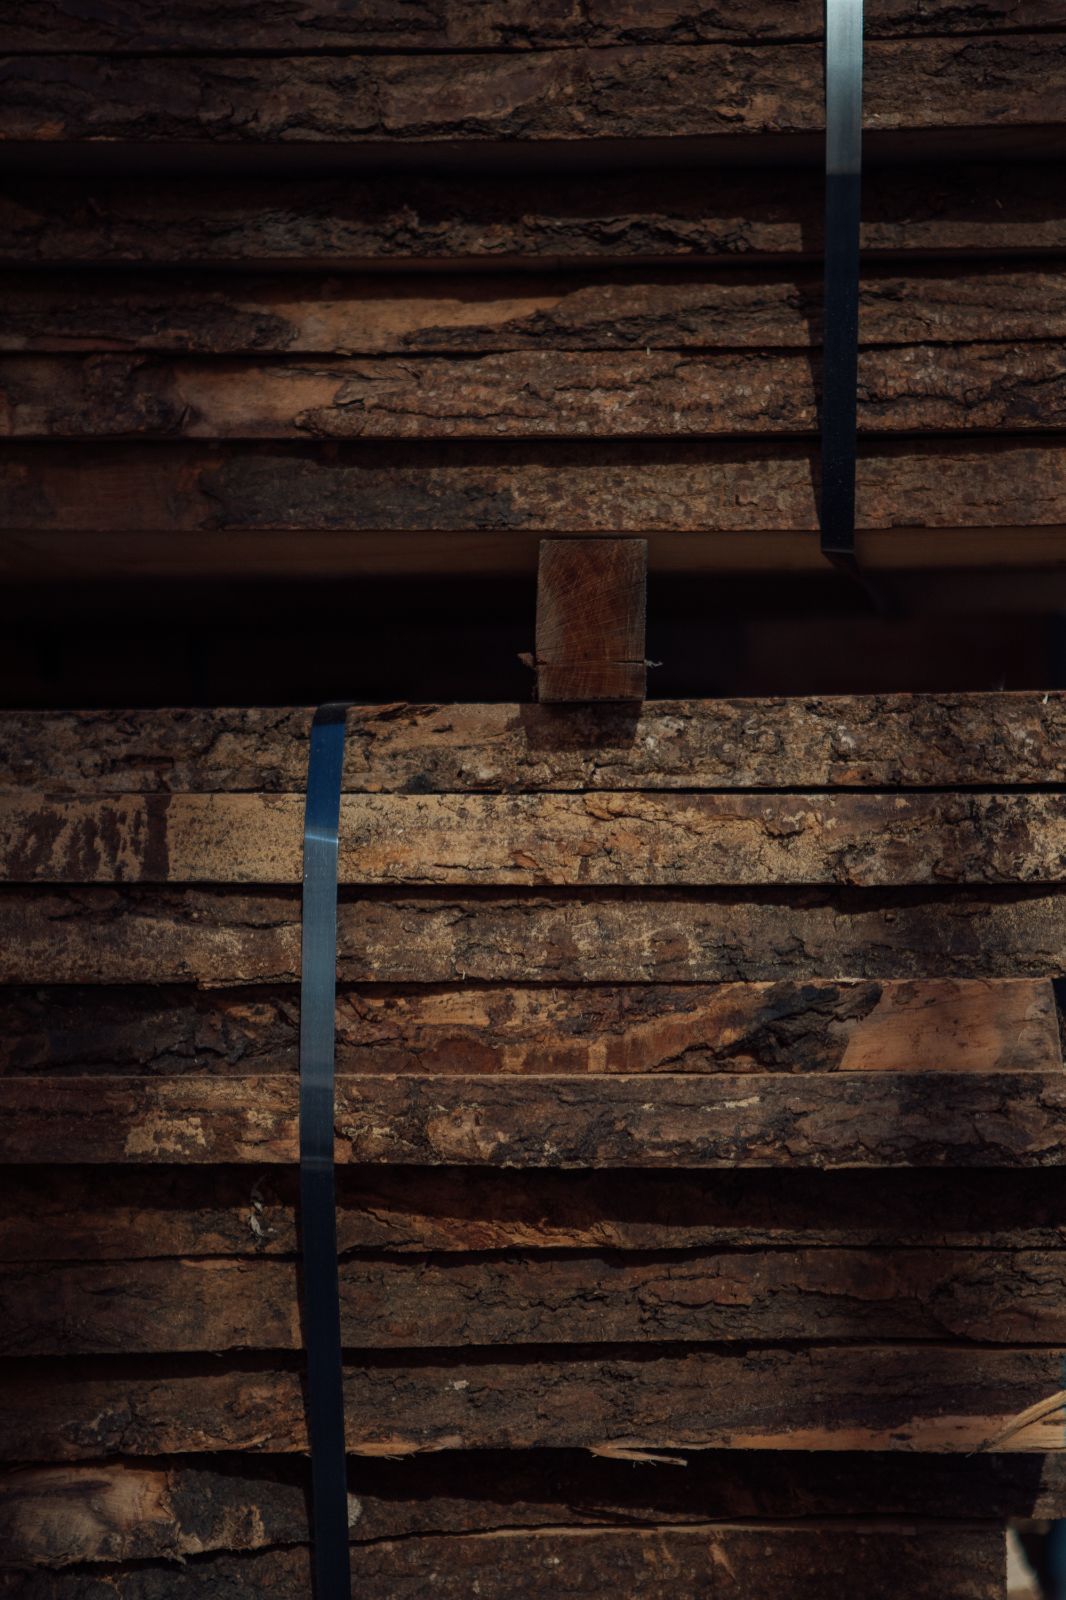 Close up of two stack of large wooden planks with bark and navy plastic straps holding the planks together.